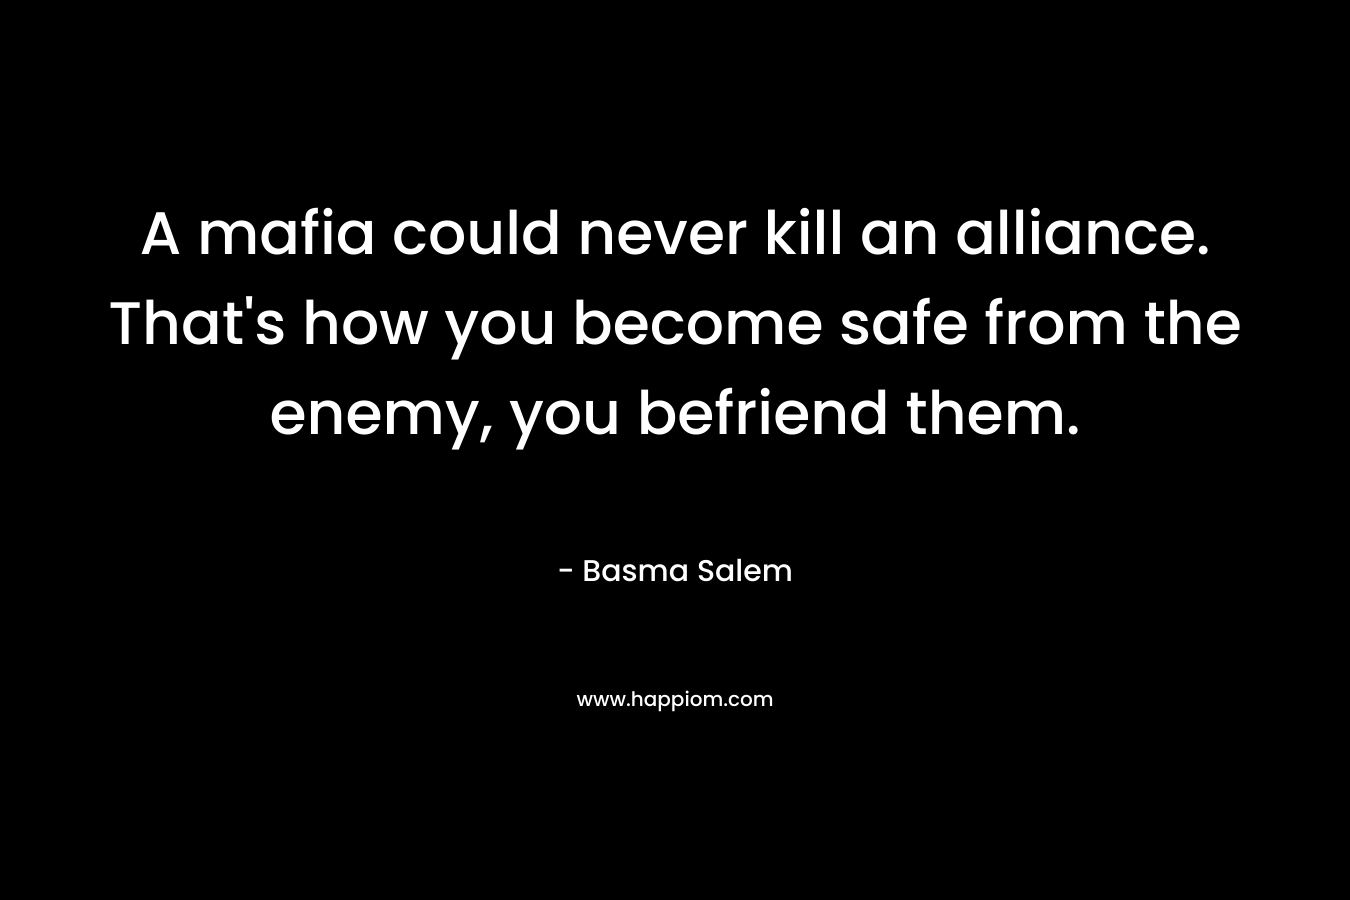 A mafia could never kill an alliance. That’s how you become safe from the enemy, you befriend them. – Basma Salem